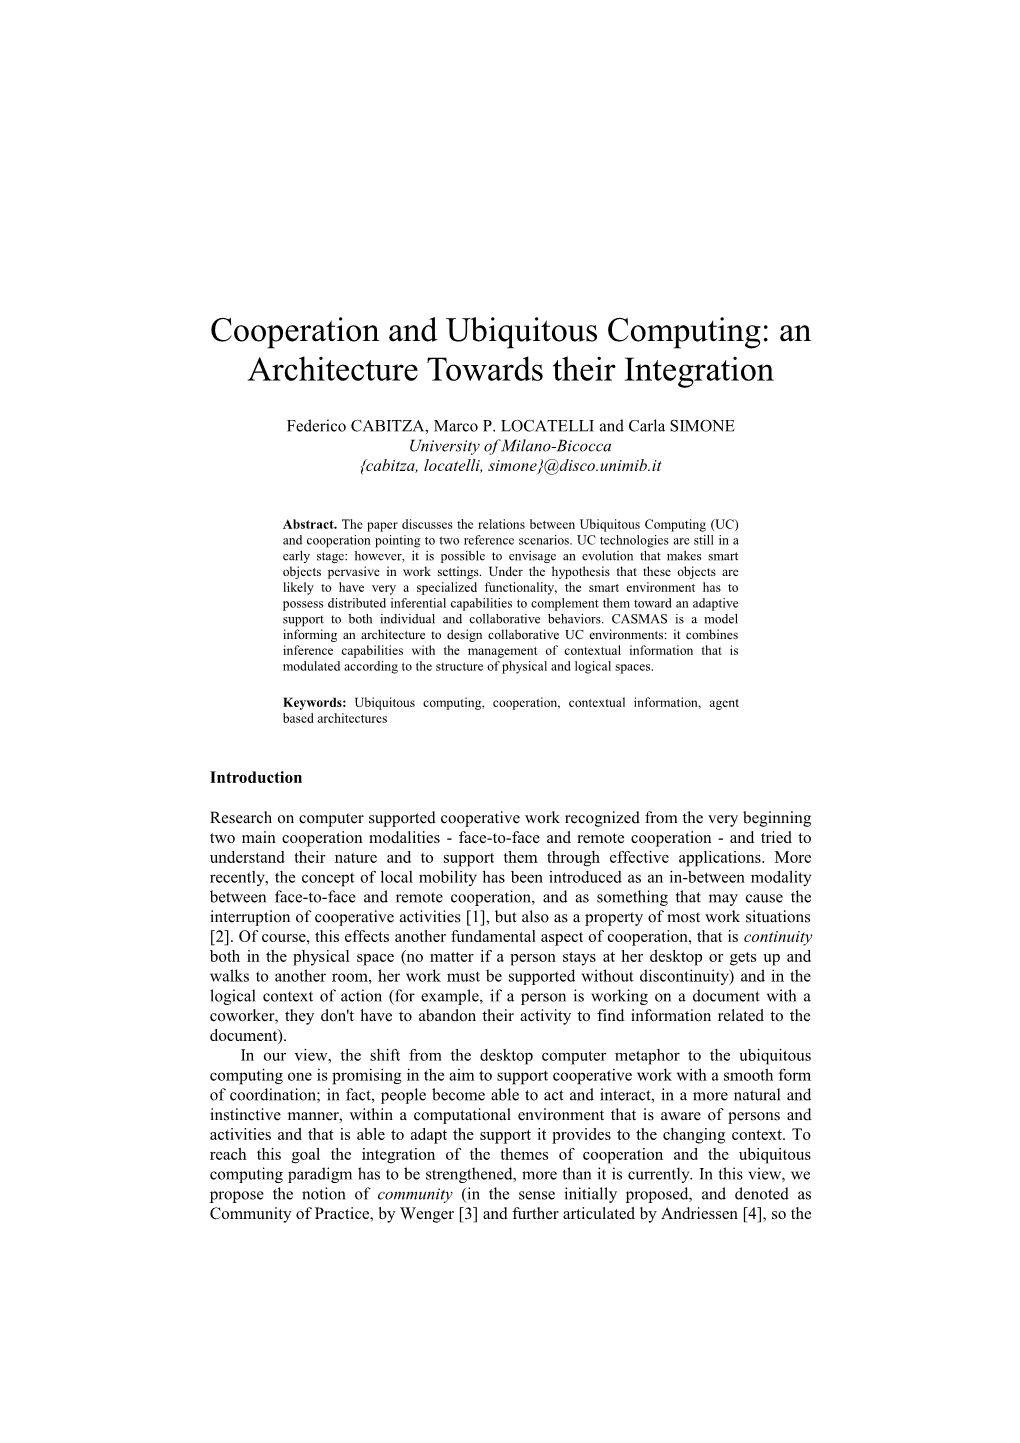 Cooperation and Ubiquitous Computing: an Architecture Towards Their Integration